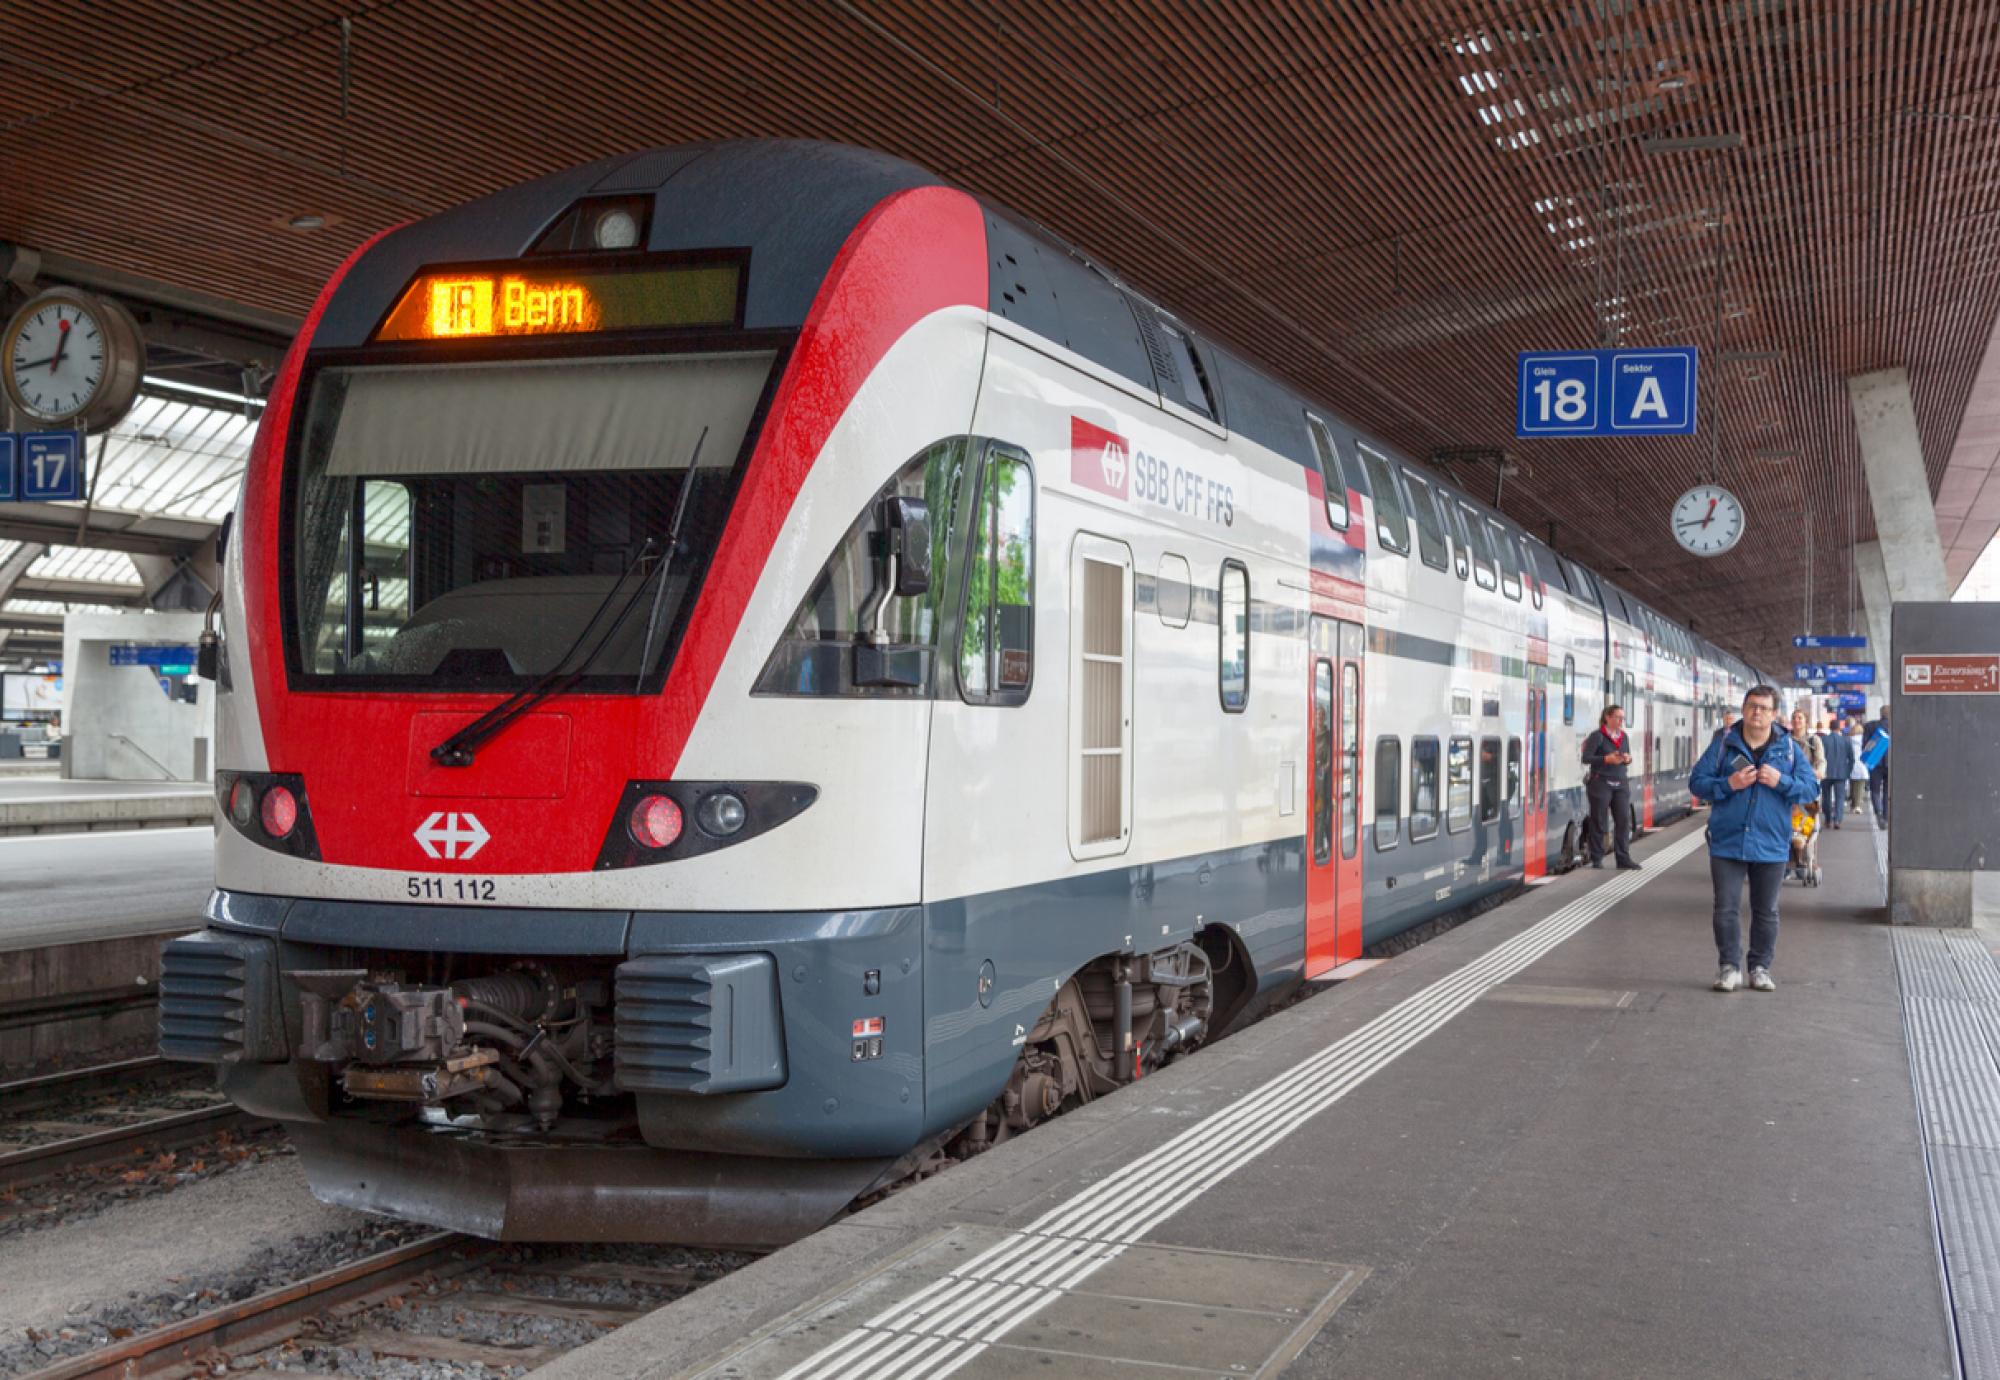 Collaboration agreement between Network Rail and Swiss Rail operator signed